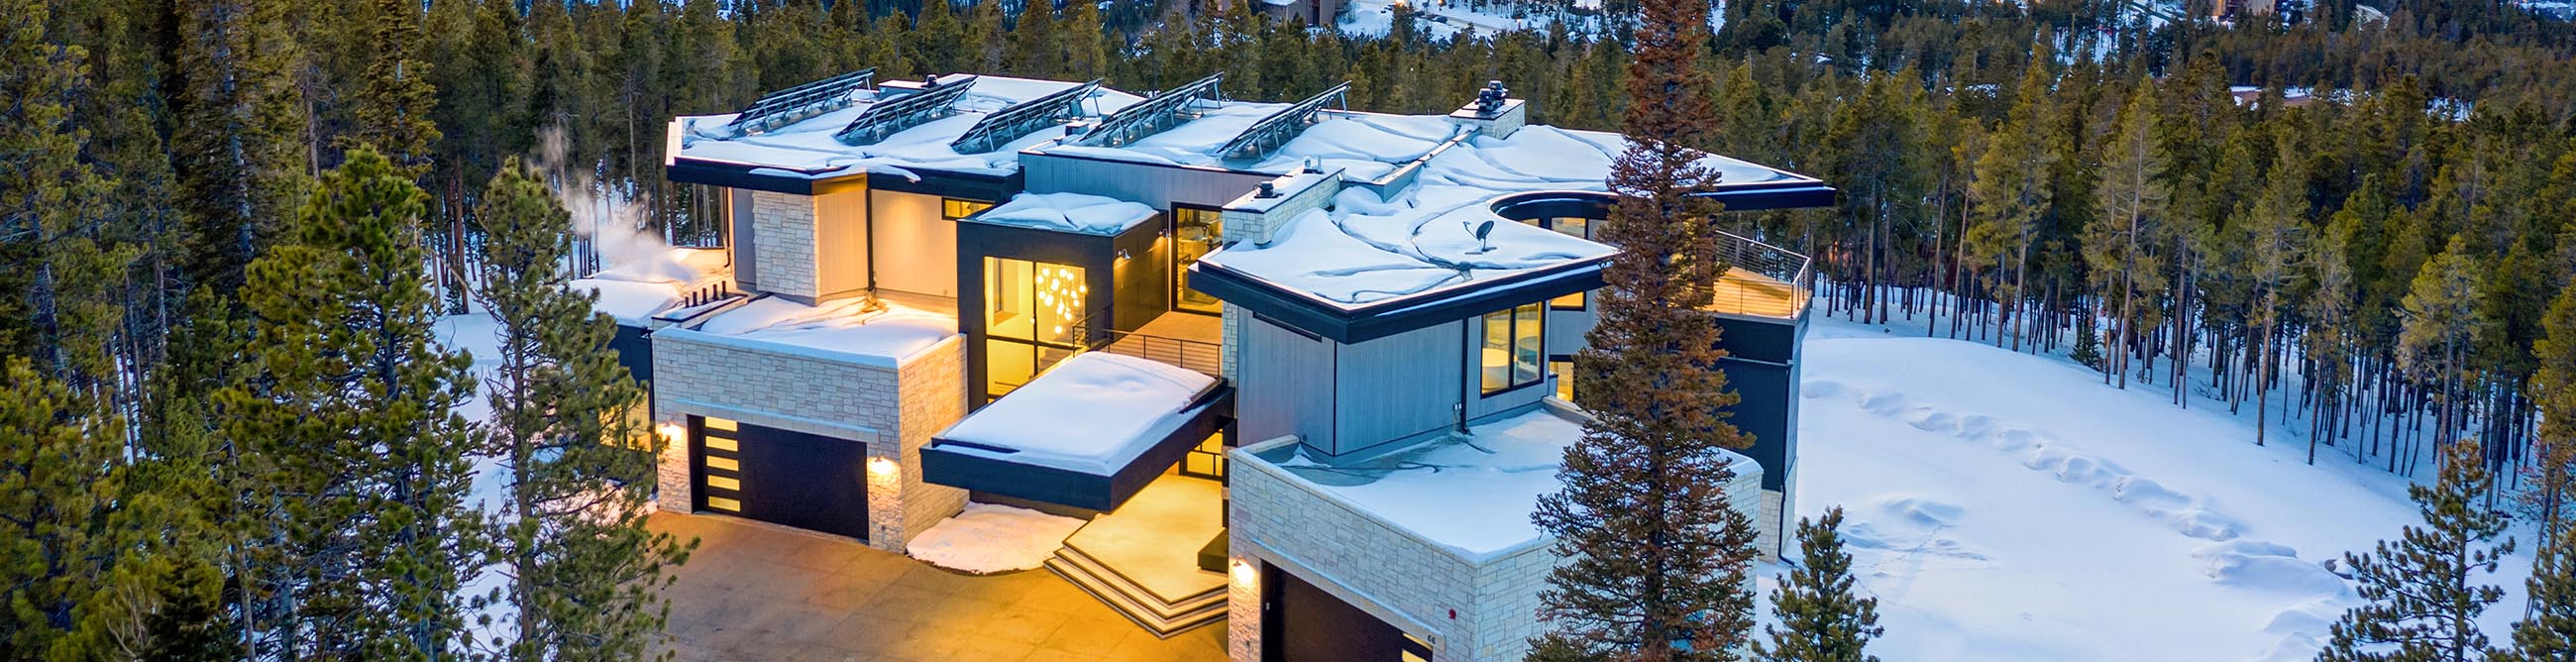 Explore The 'Soft Modern' Style Of This Ski-In Breckenridge Home